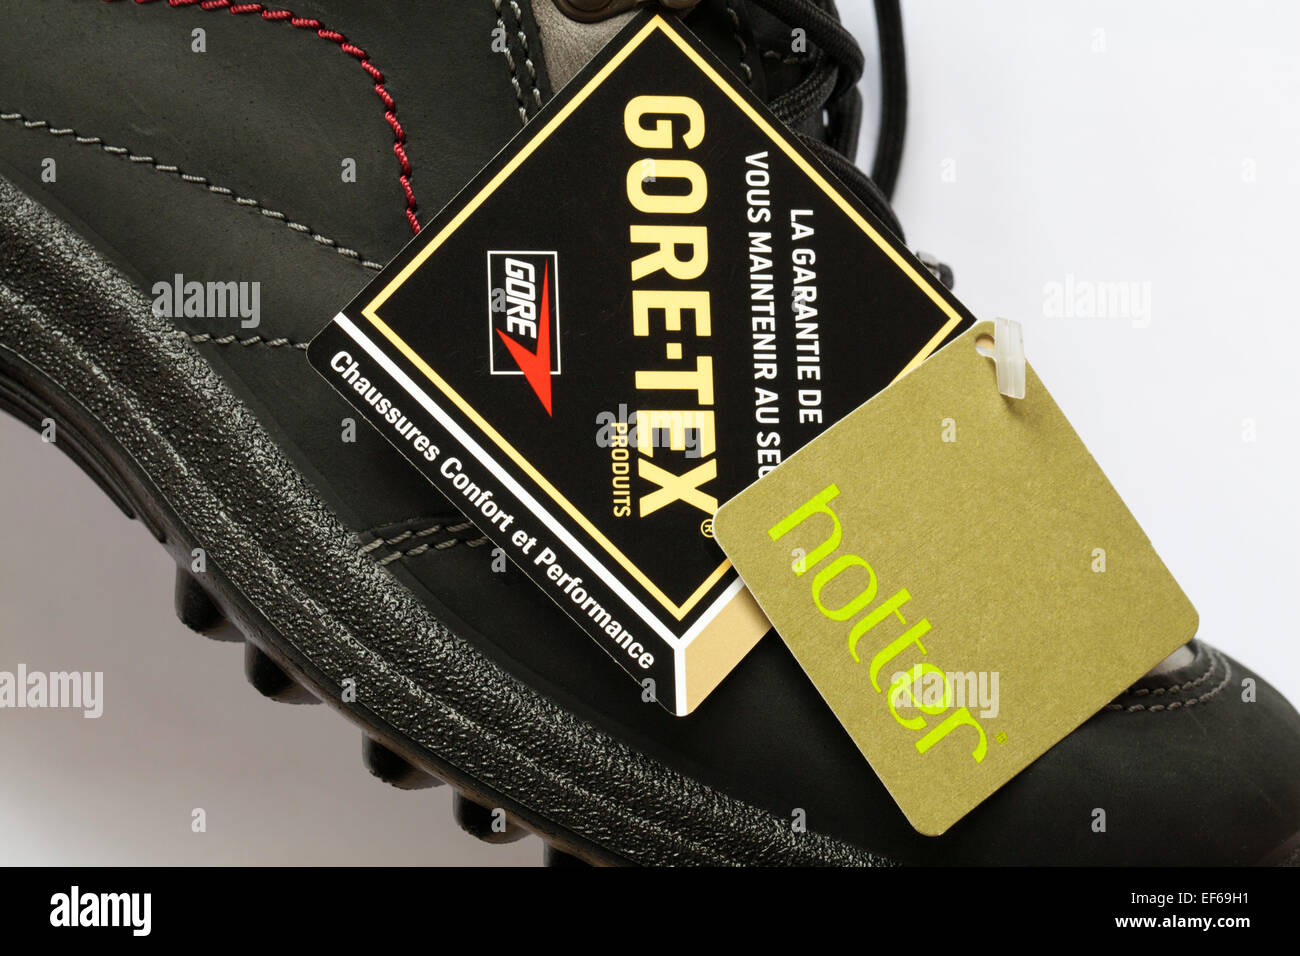 labels on Hotter Gore-tex boots guaranteed to keep you dryGoretex Stock Photo